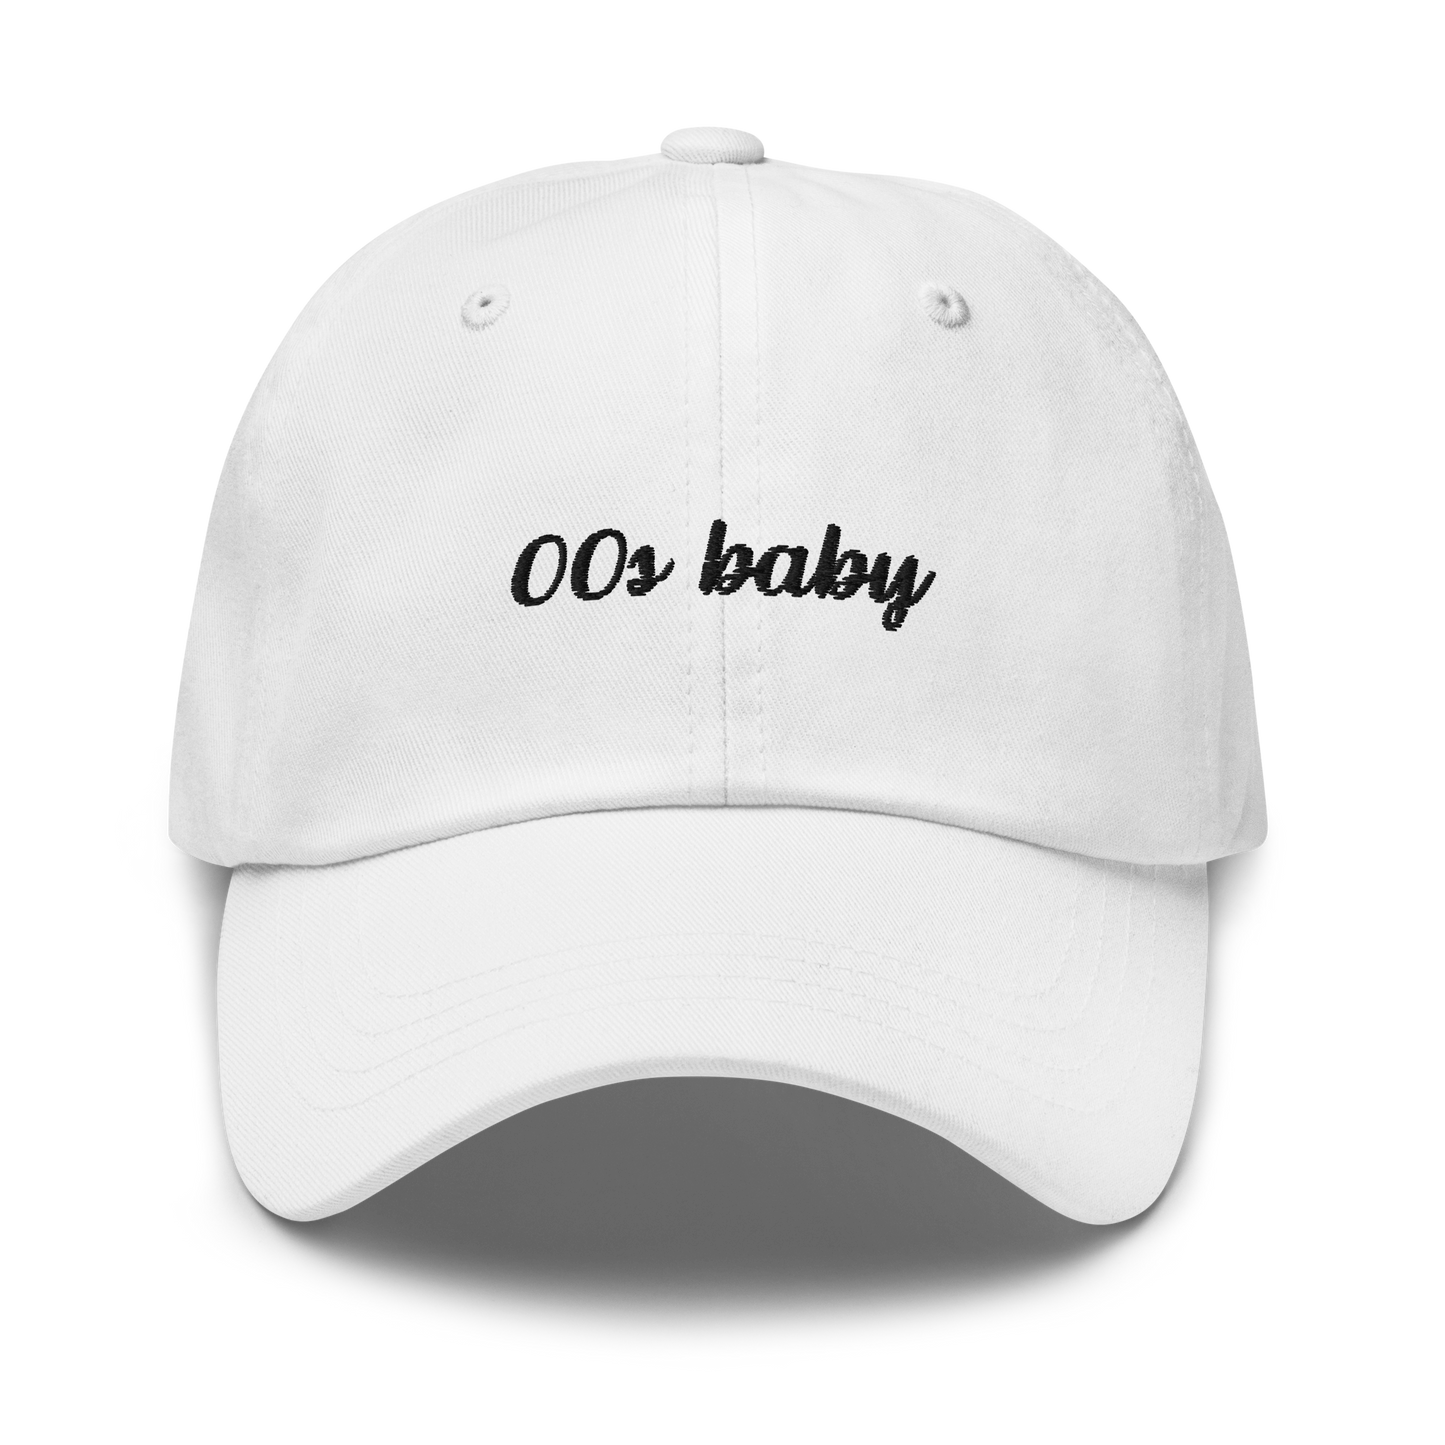 00s Baby Embroidered Dad Hat